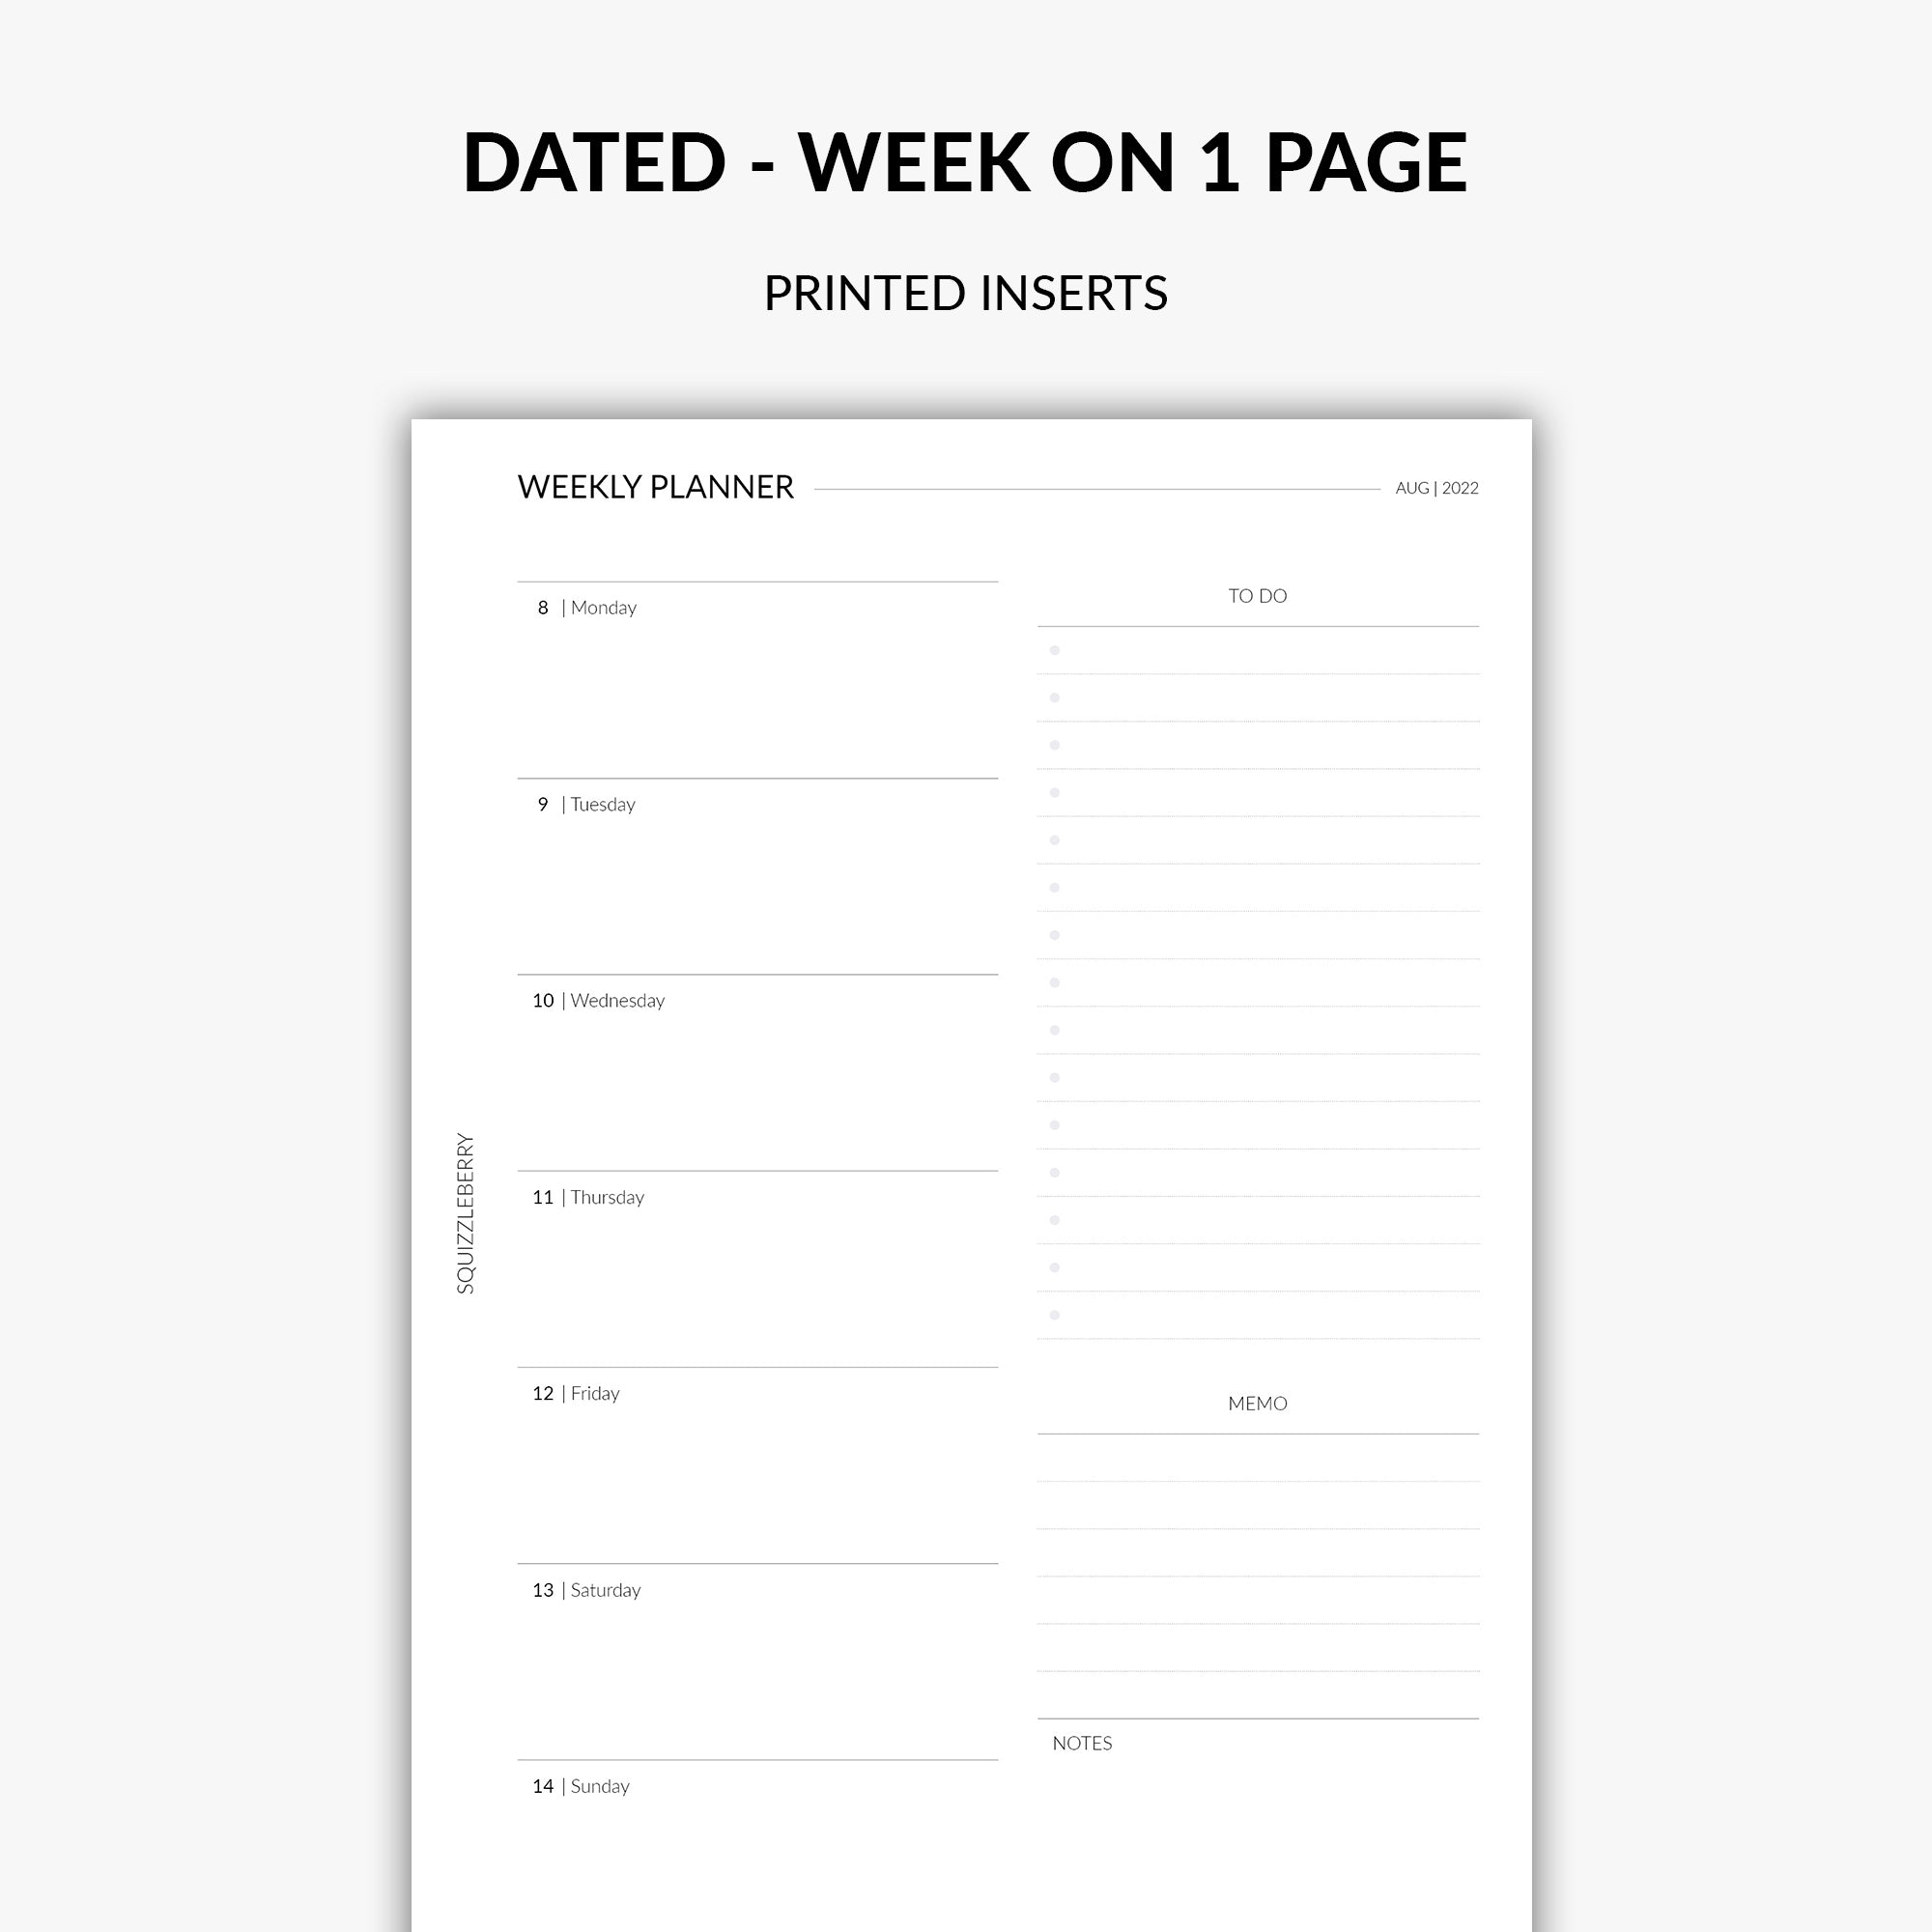 Dated - Weekly Planner